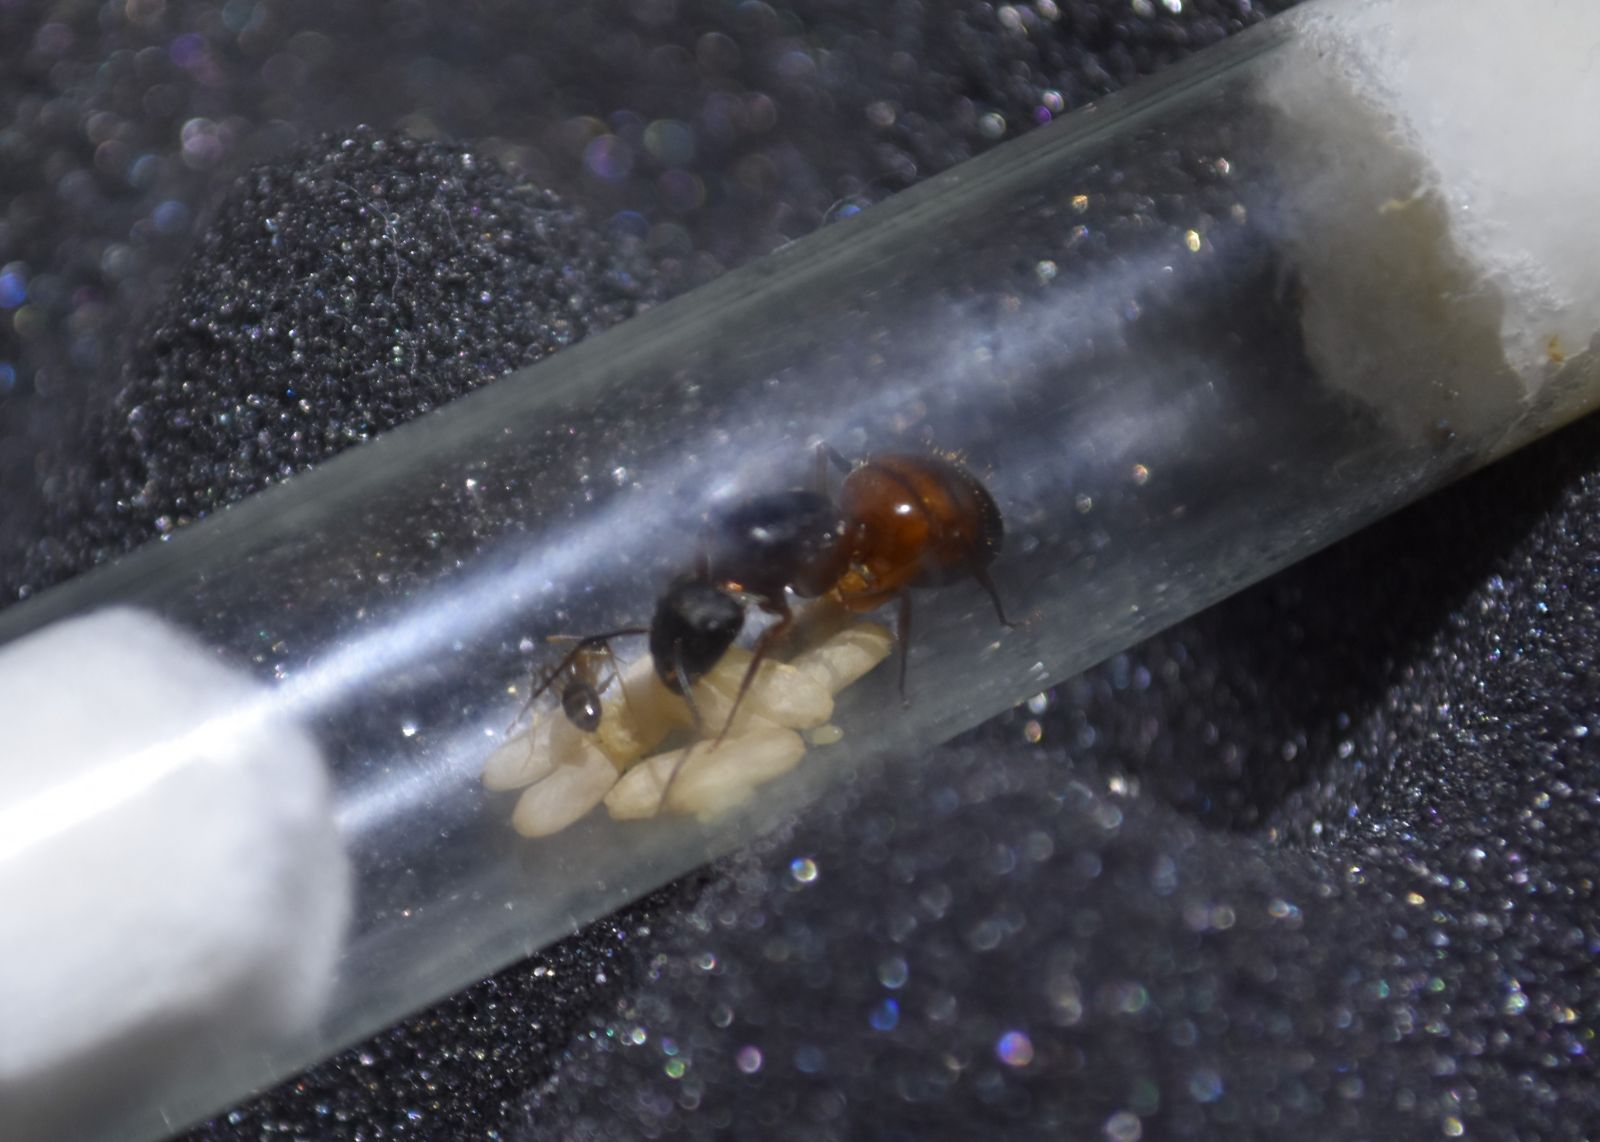 Camponotus with worker